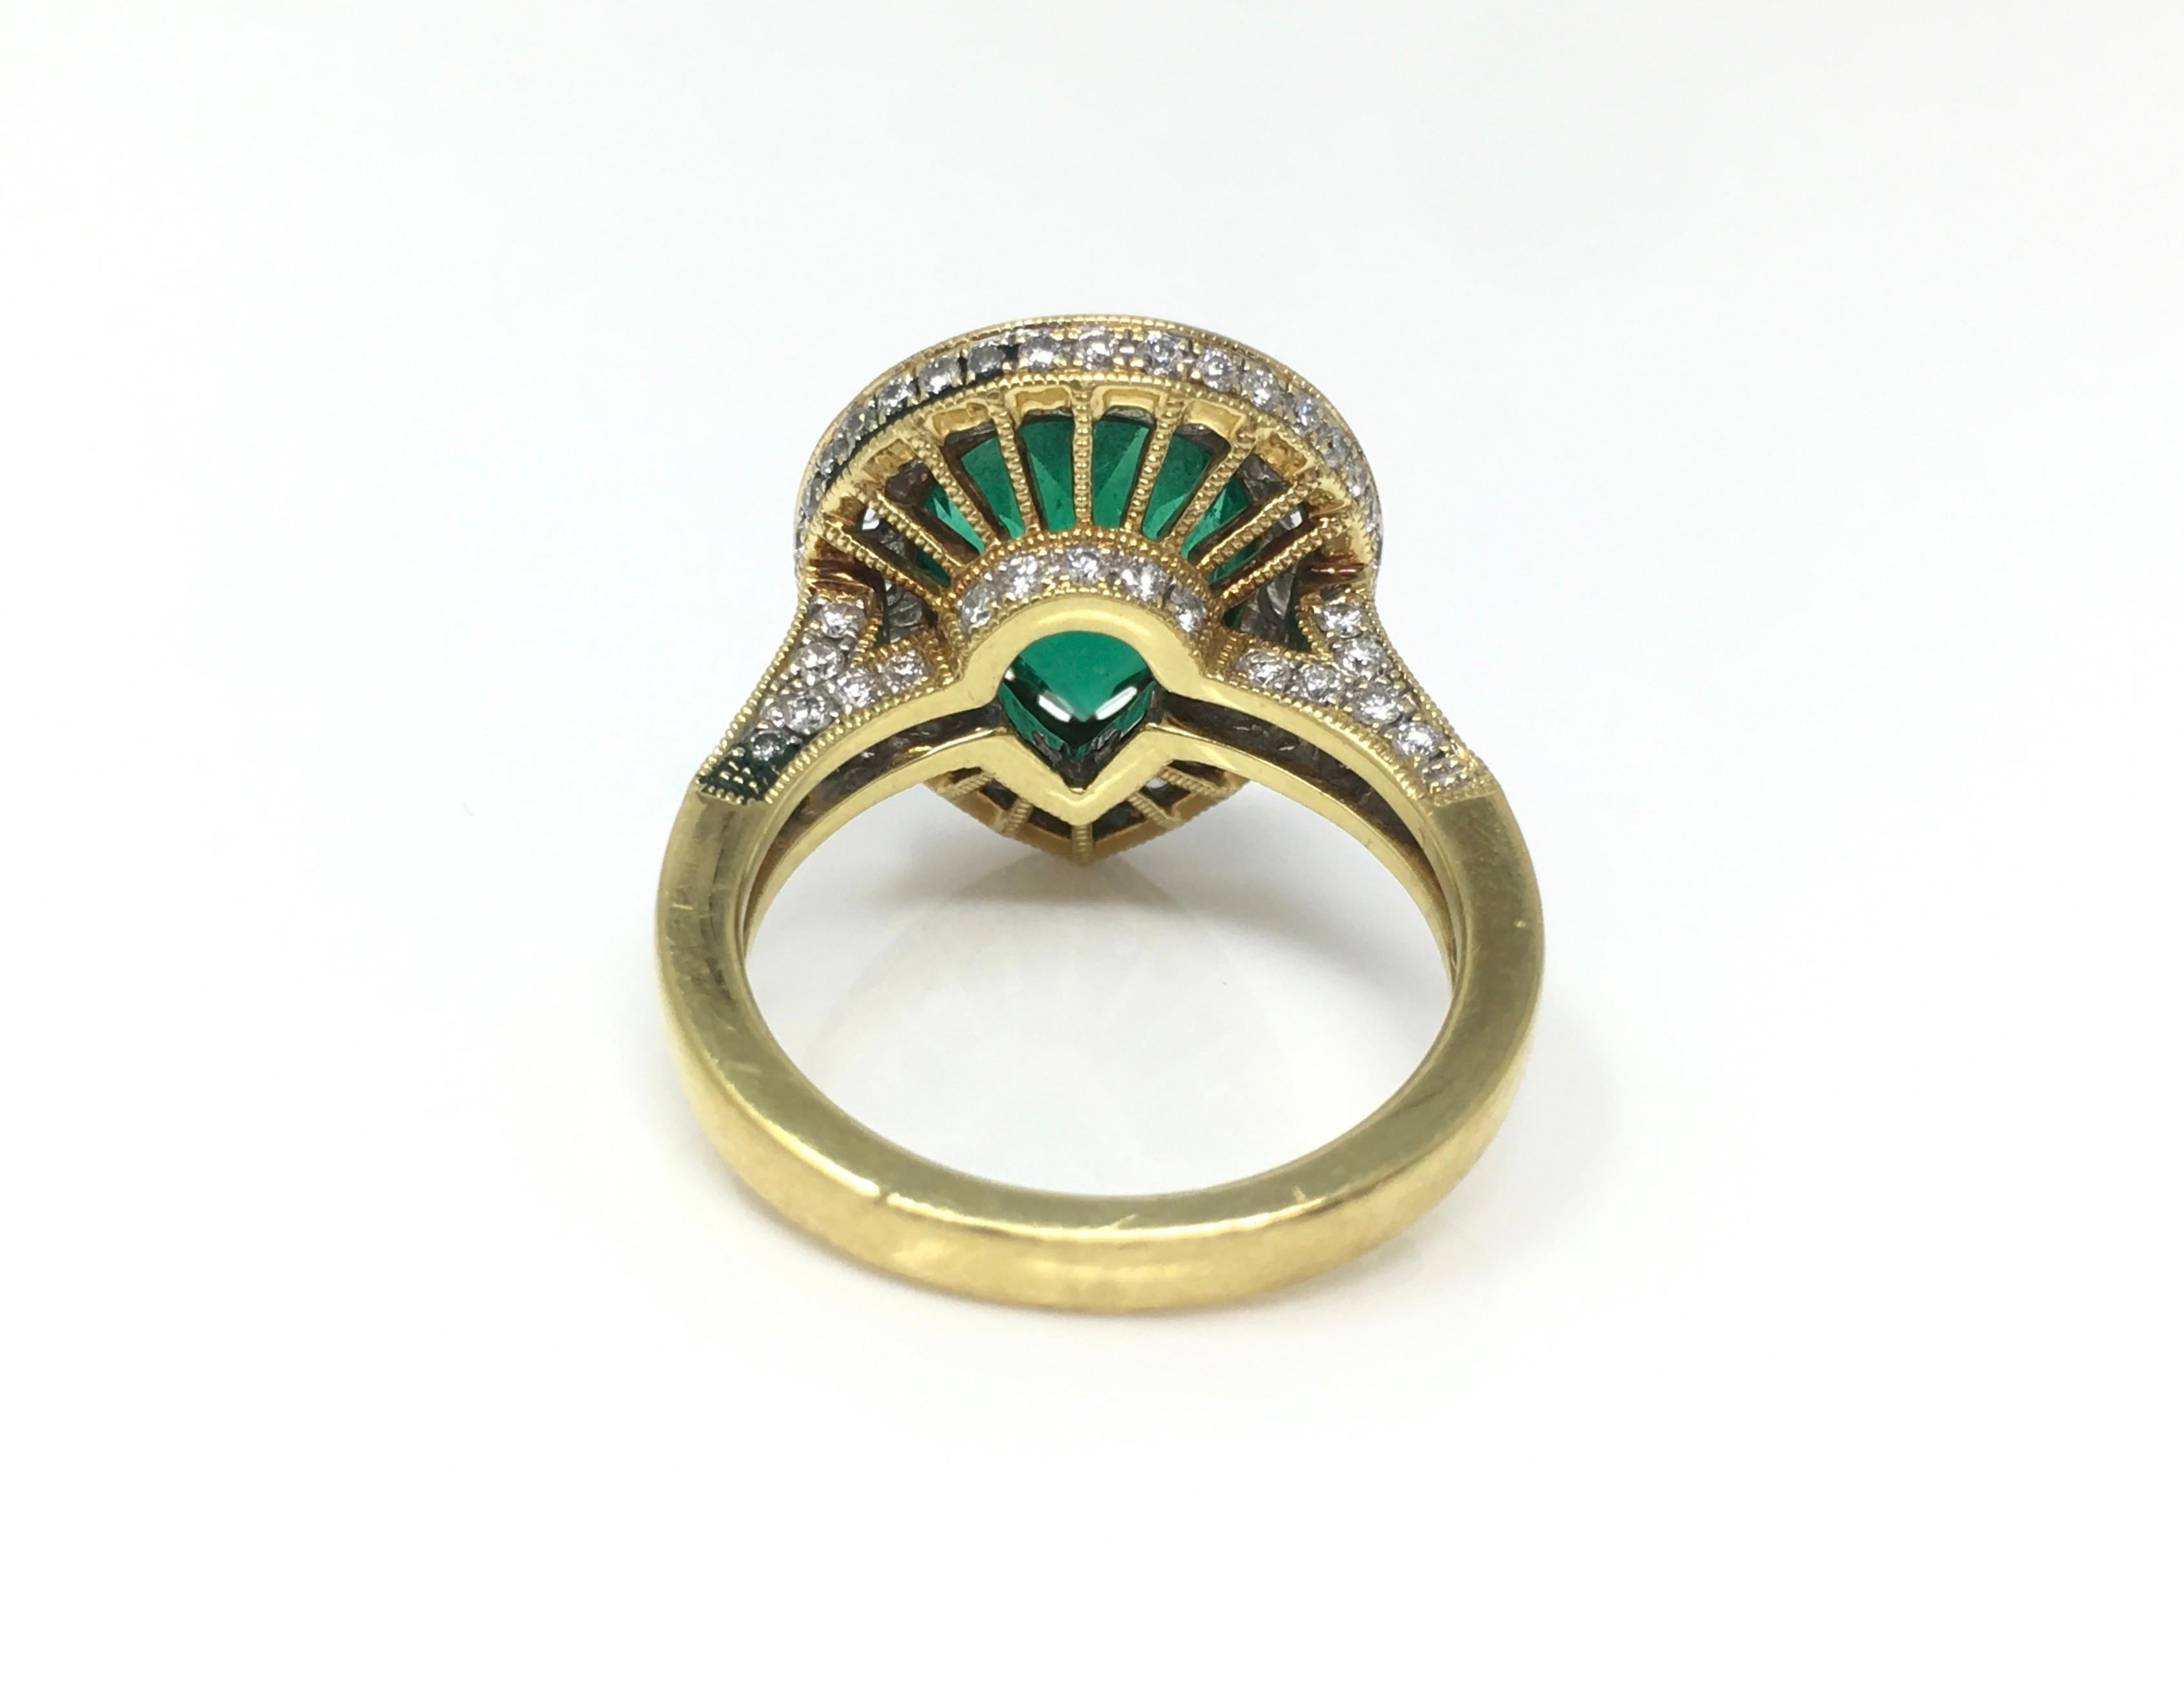 3.25 Carat Emerald and Diamond Engagement Ring in 18K Yellow Gold 2